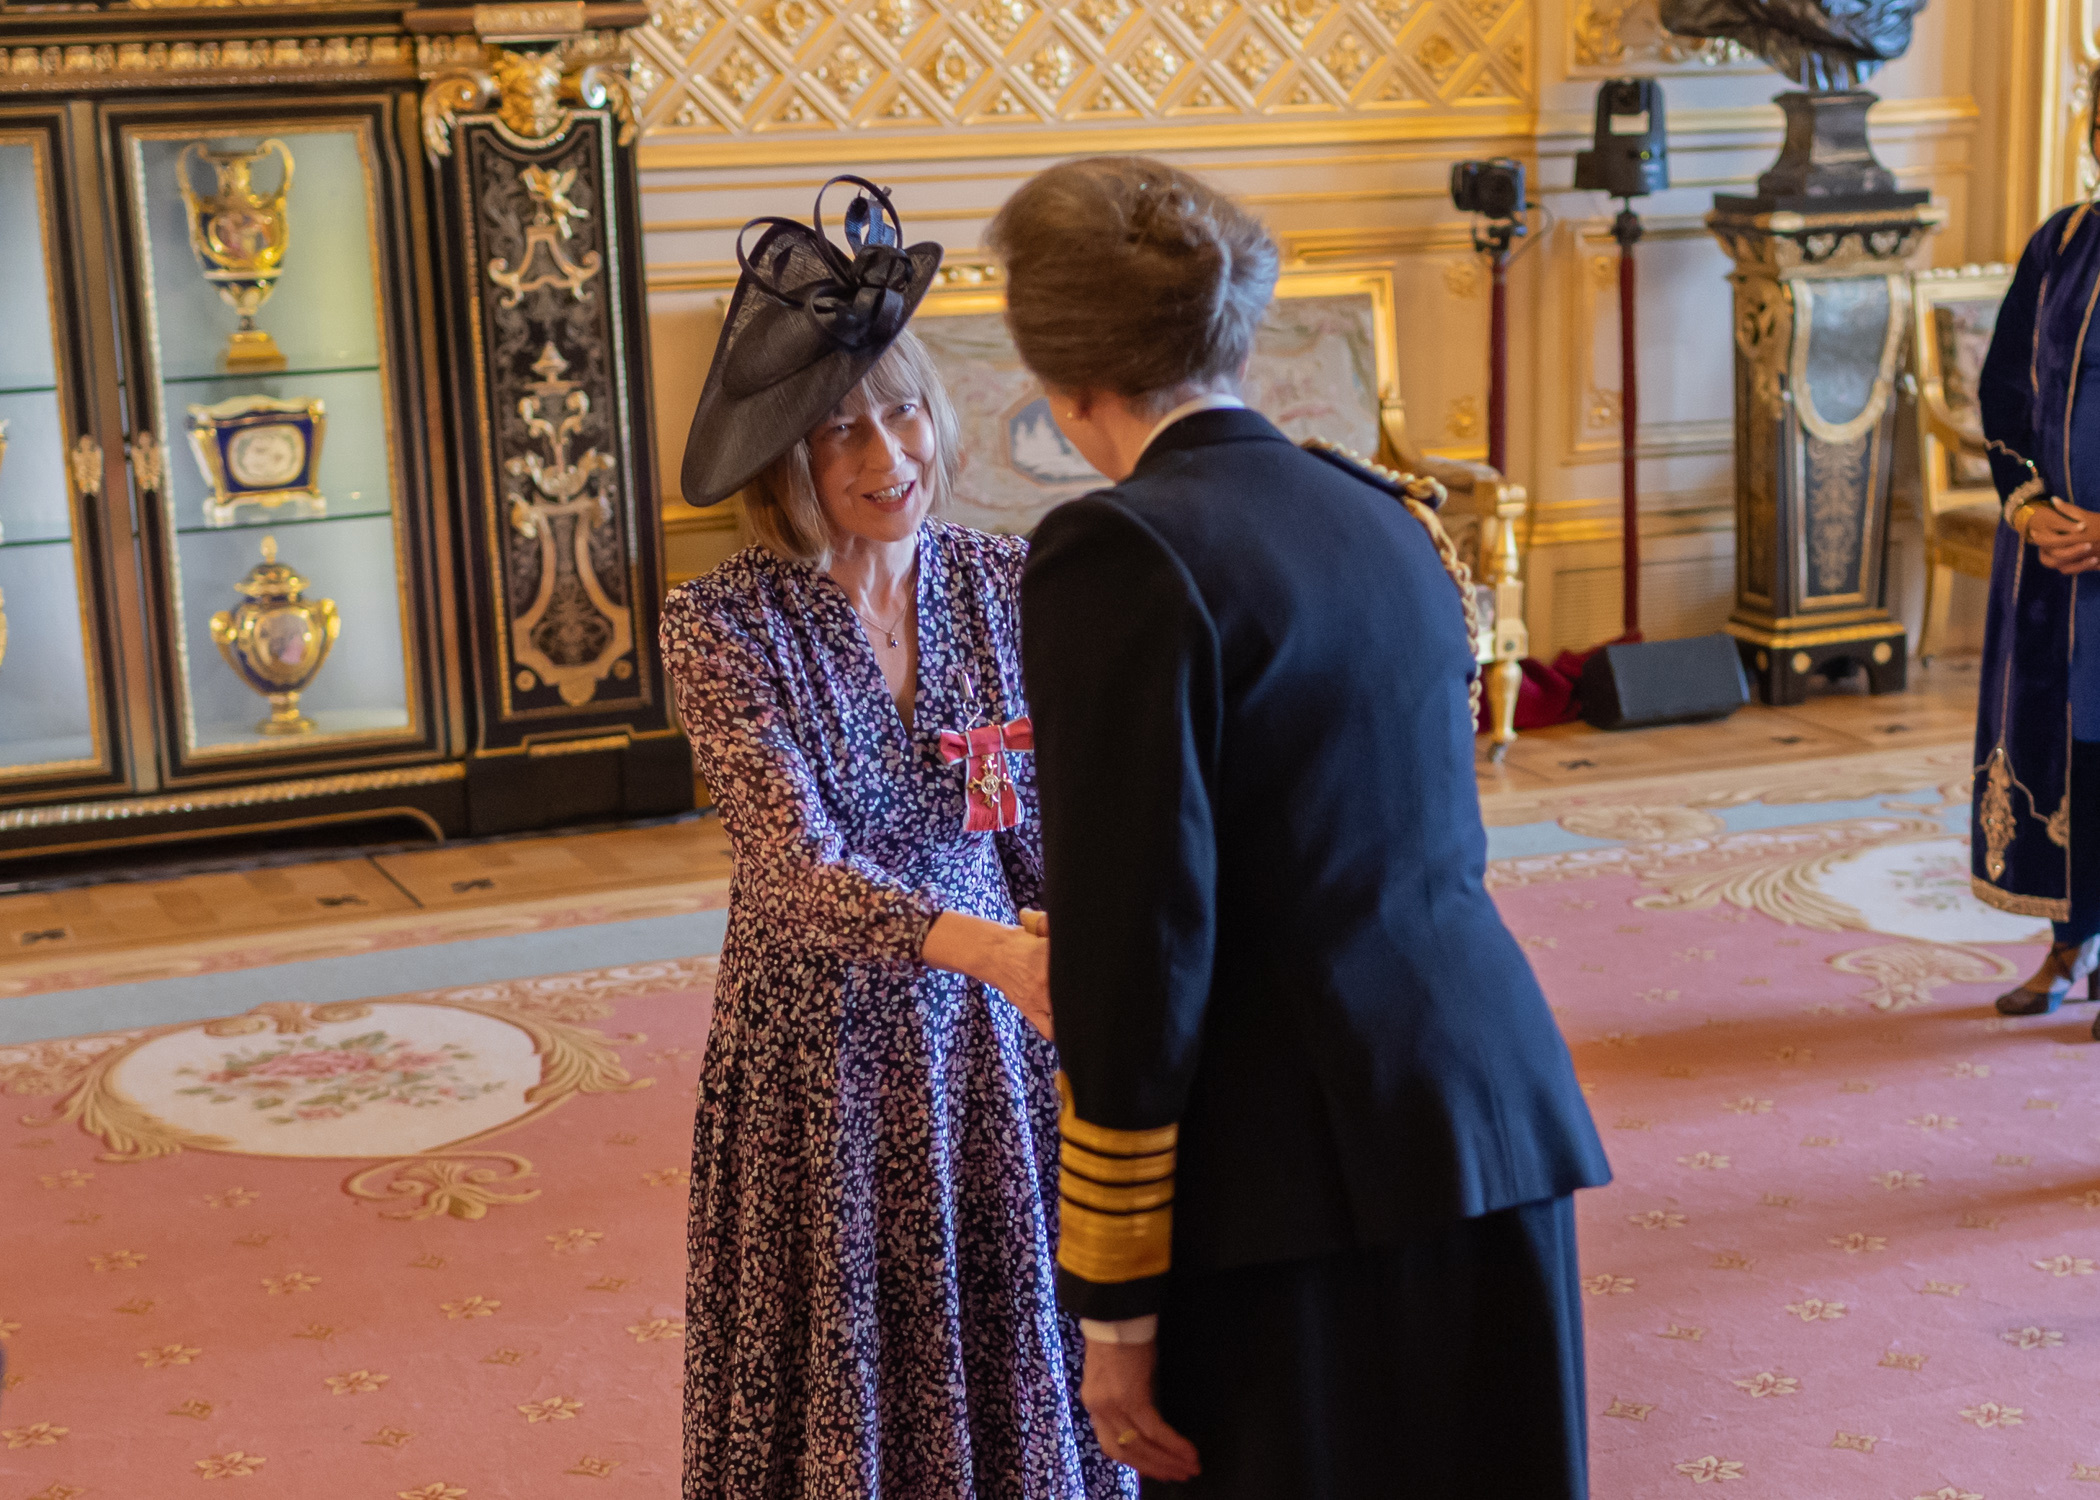 Chief Executive, Kerry Jackson, receives OBE at Windsor Castle